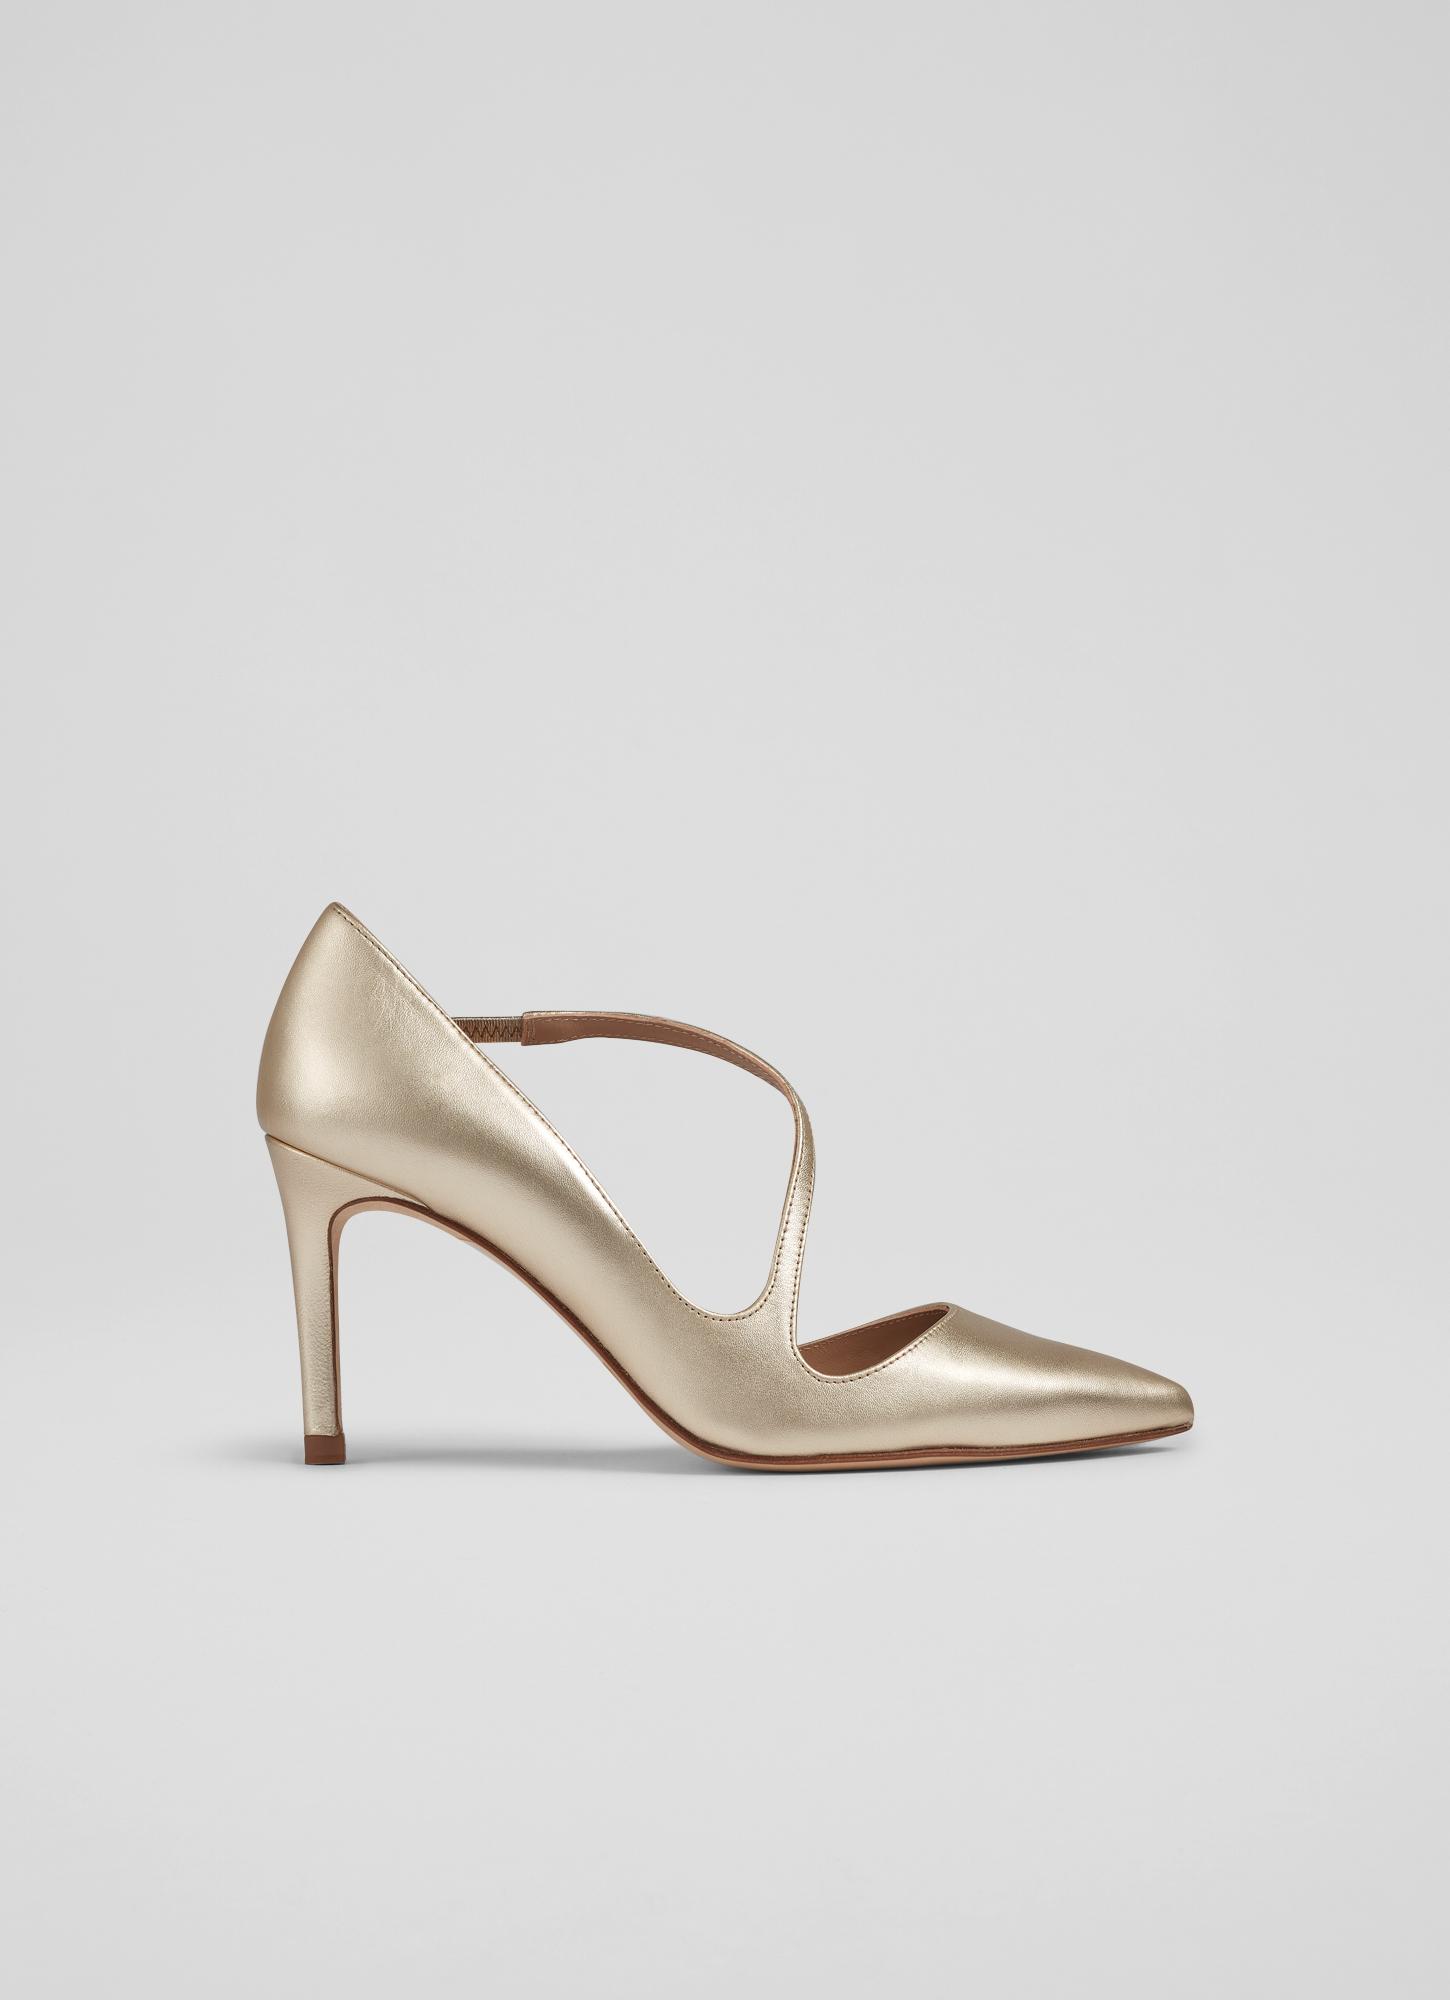 L.K.Bennett Heather Gold Leather D'orsay Courts, Champagne